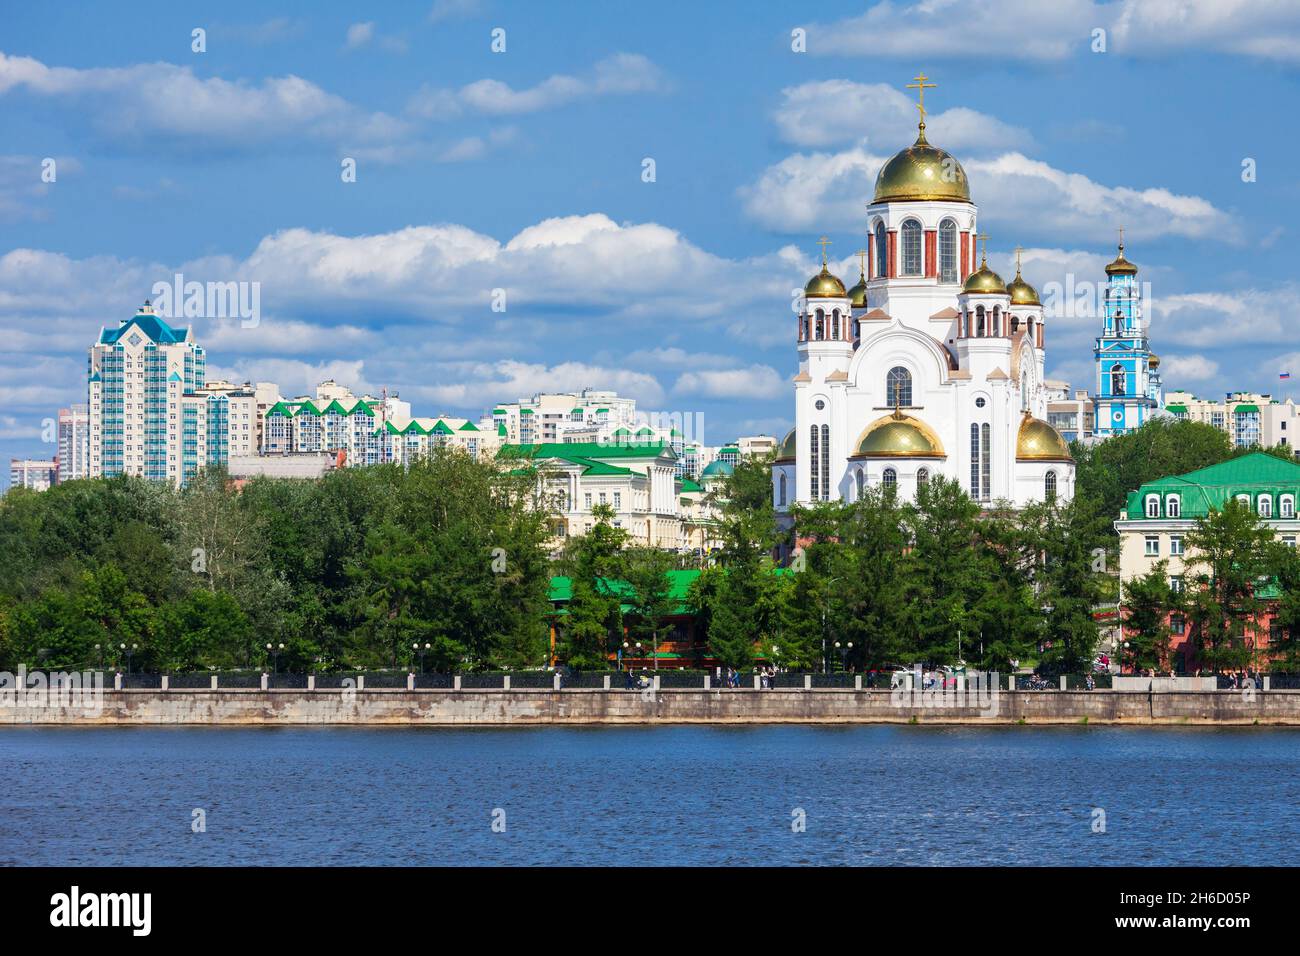 The Church on Blood in Honour of All Saints Resplendent in the Russian Land is a Russian Orthodox church in Yekaterinburg, Russia. Stock Photo